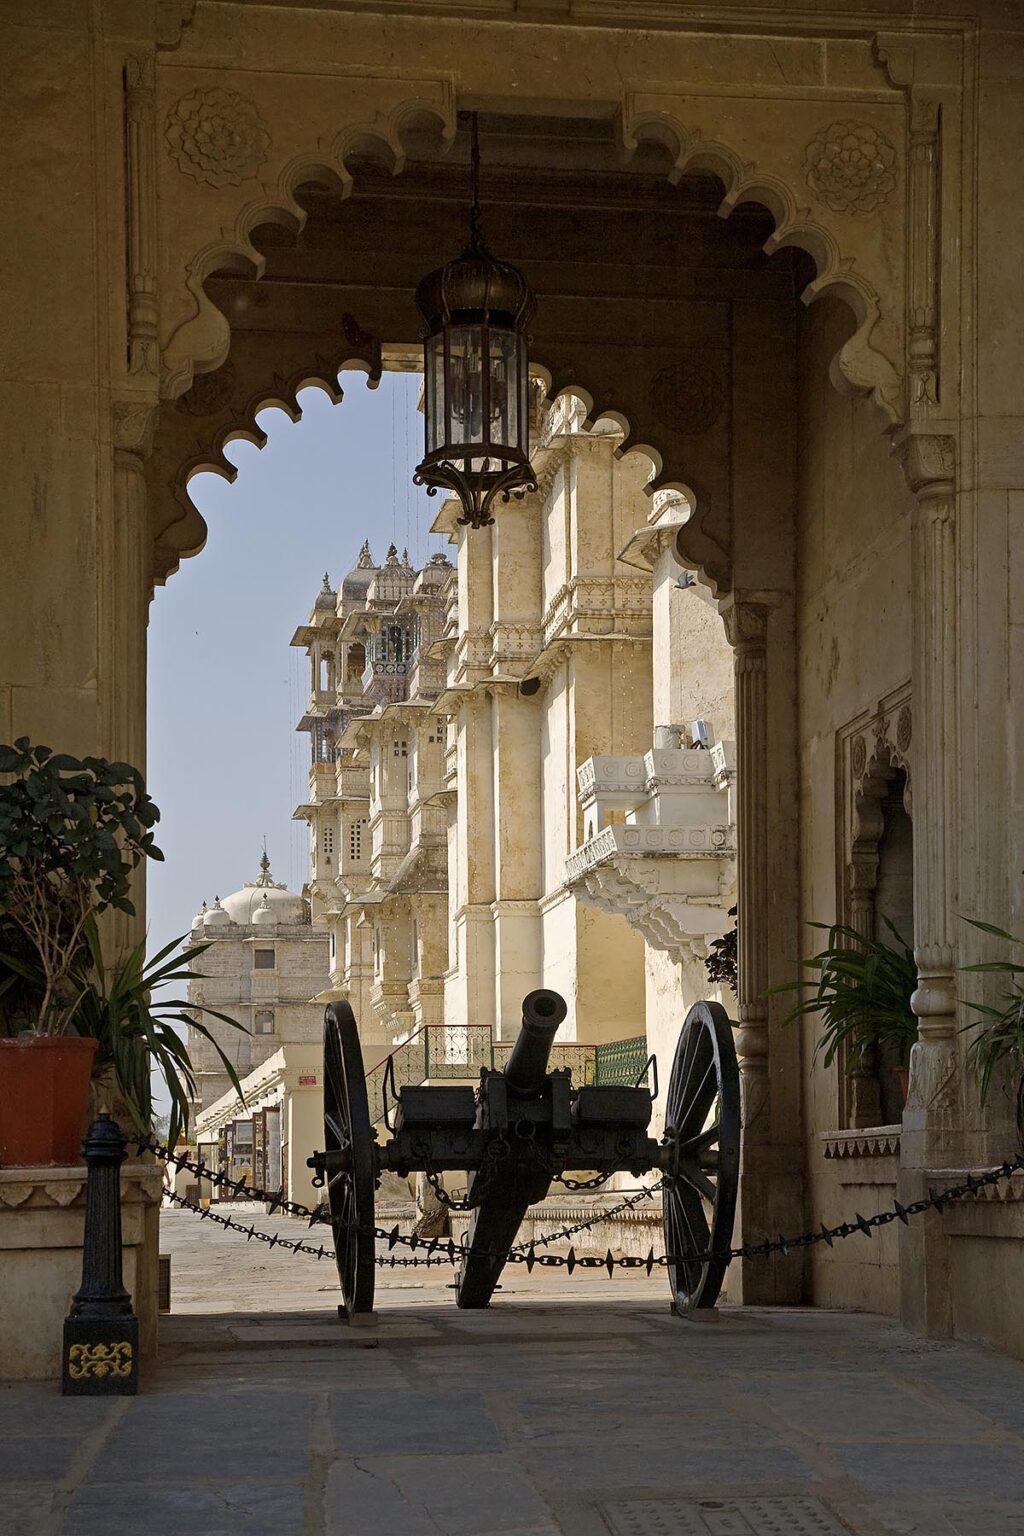 A cannon guards the TRIPOLIA GATE where one enters the CITY PALACE of UDAIPUR built by various Maharajas starting in 1600 AD - RAJASTHAN, INDIA